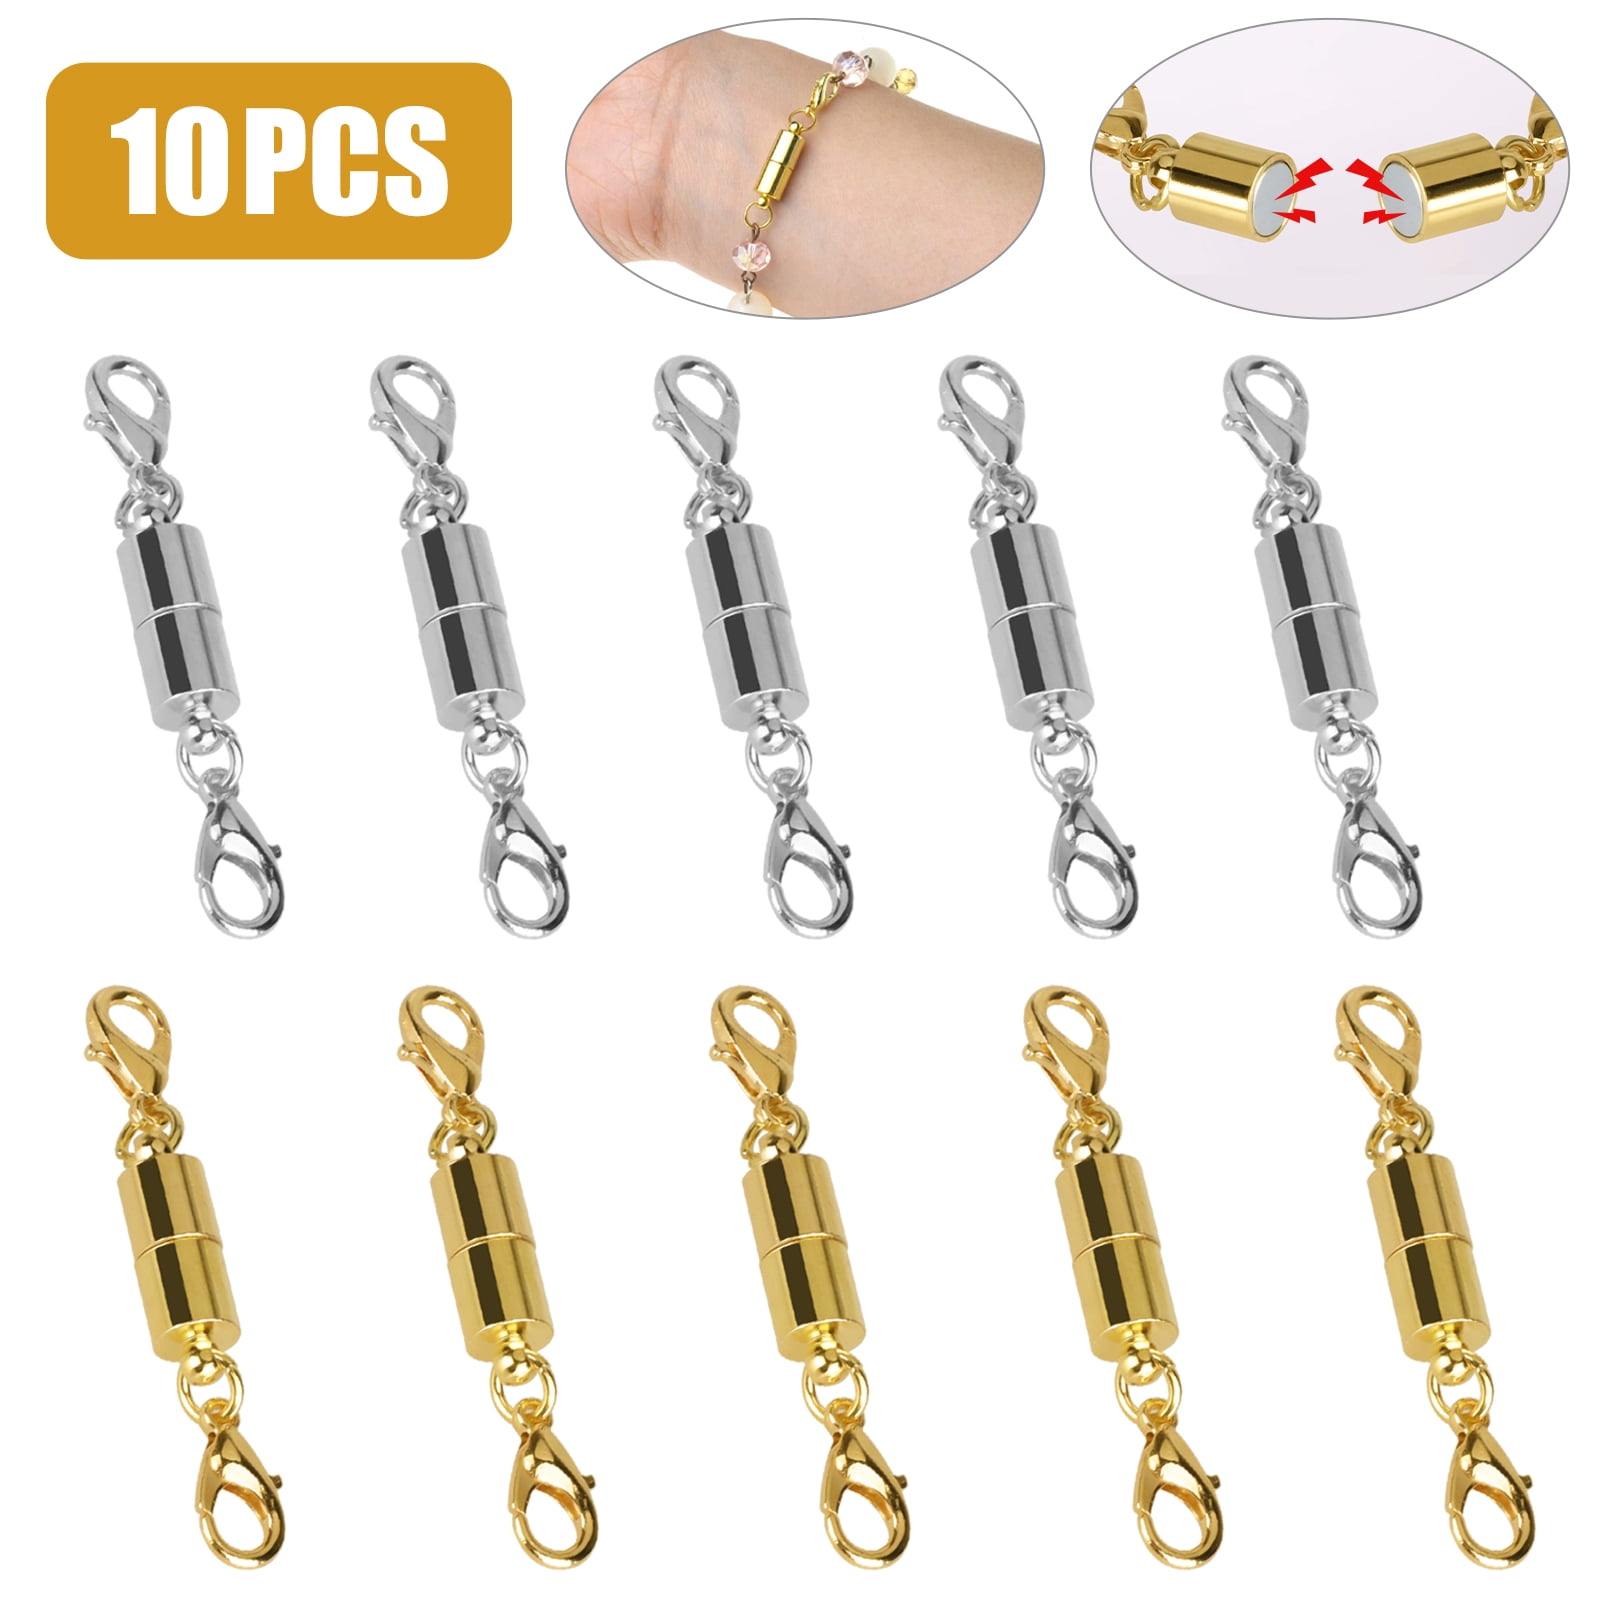 10 Pieces Gold and Silver Necklace Clasps, TSV Magnetic Jewelry